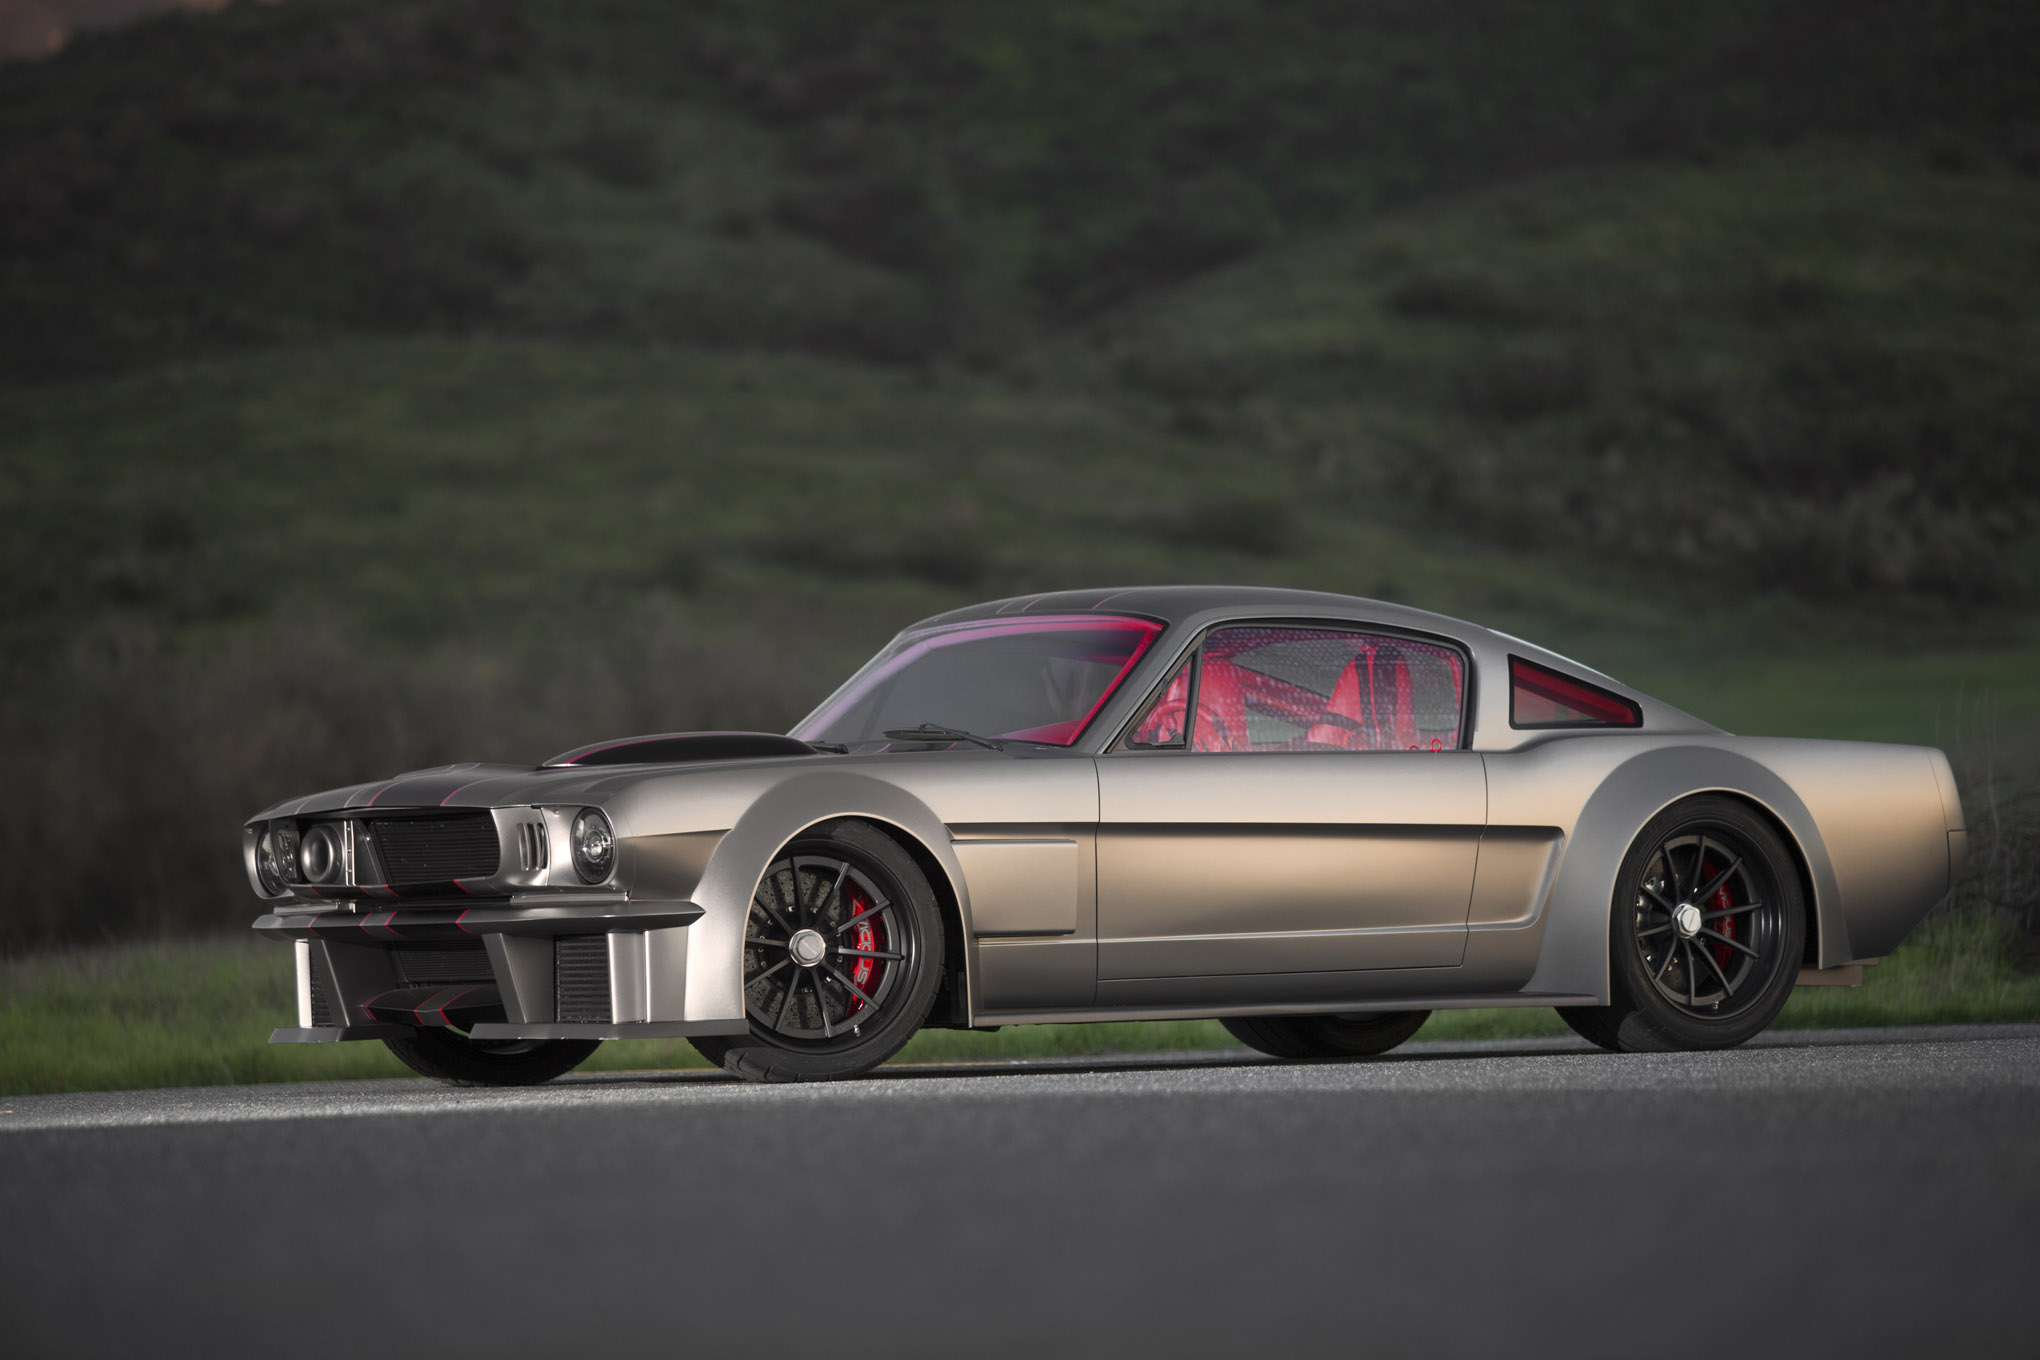 Ford Mustang Fastback Hot Rod Muscle Car Race Car 2040x1360